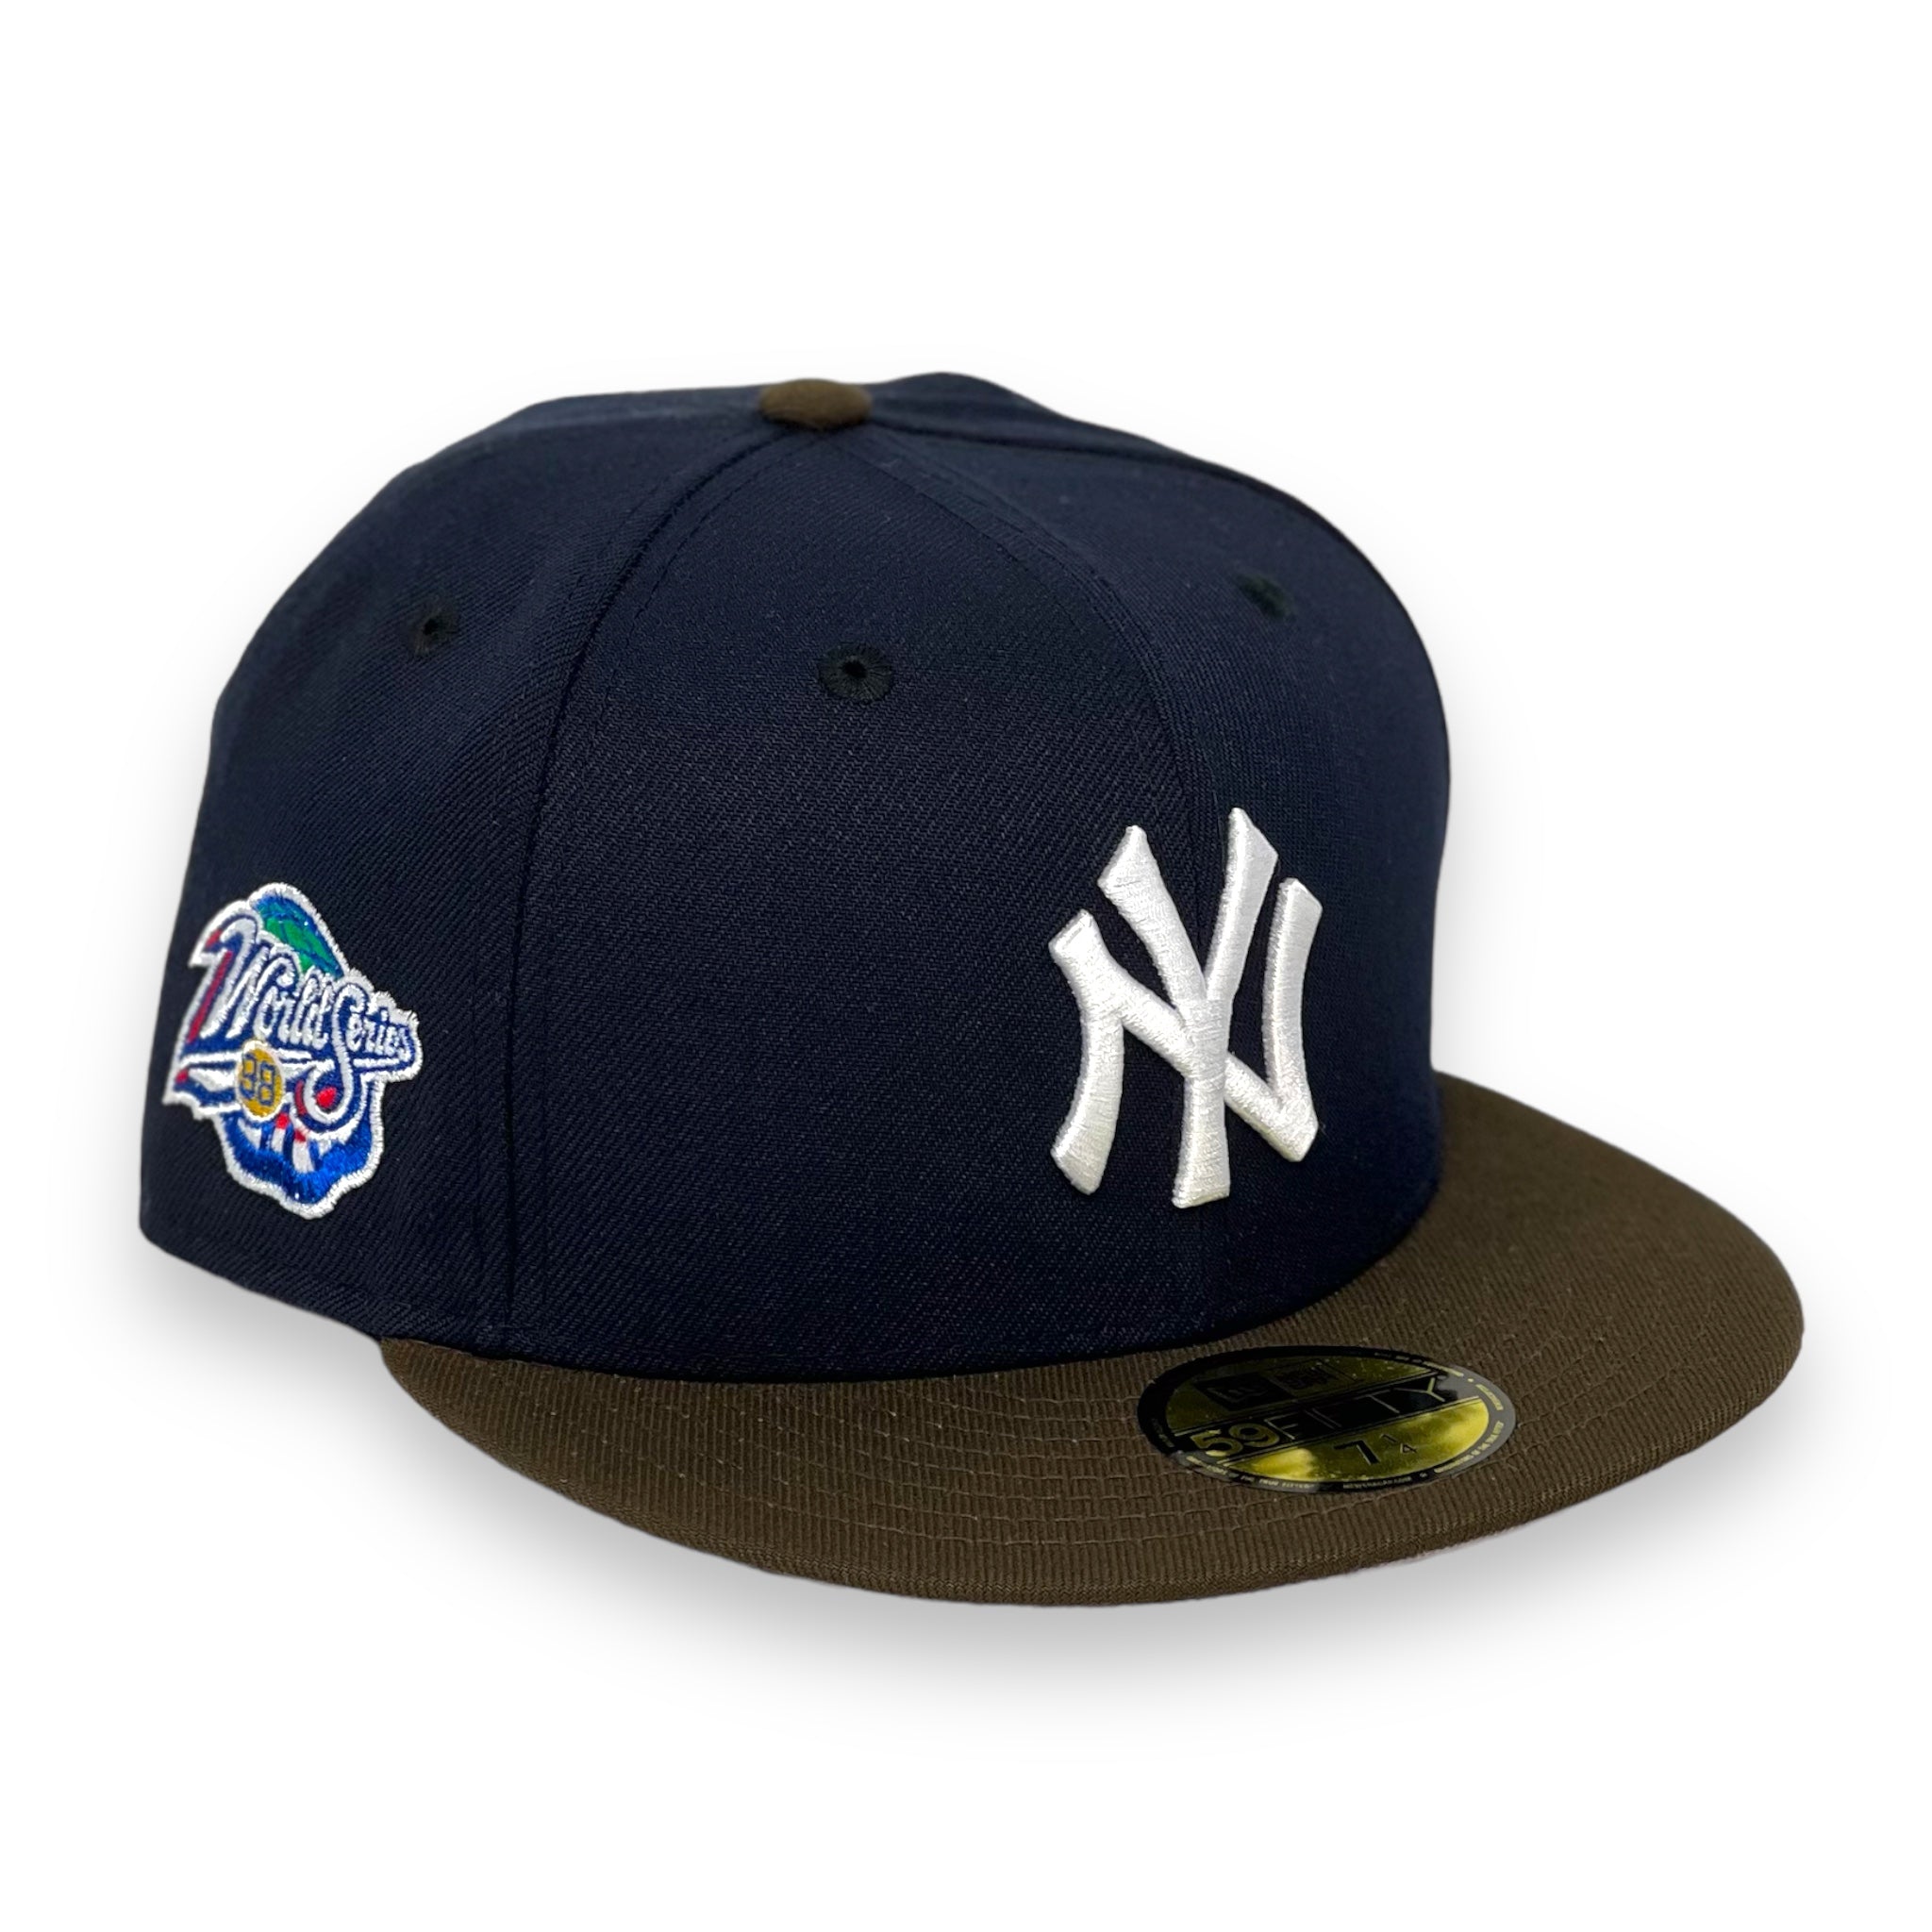 NEW YORK YANKEES (NAVY/BROWN)(1998 WORLD SERIES) NEW ERA 59FIFTY FITTED